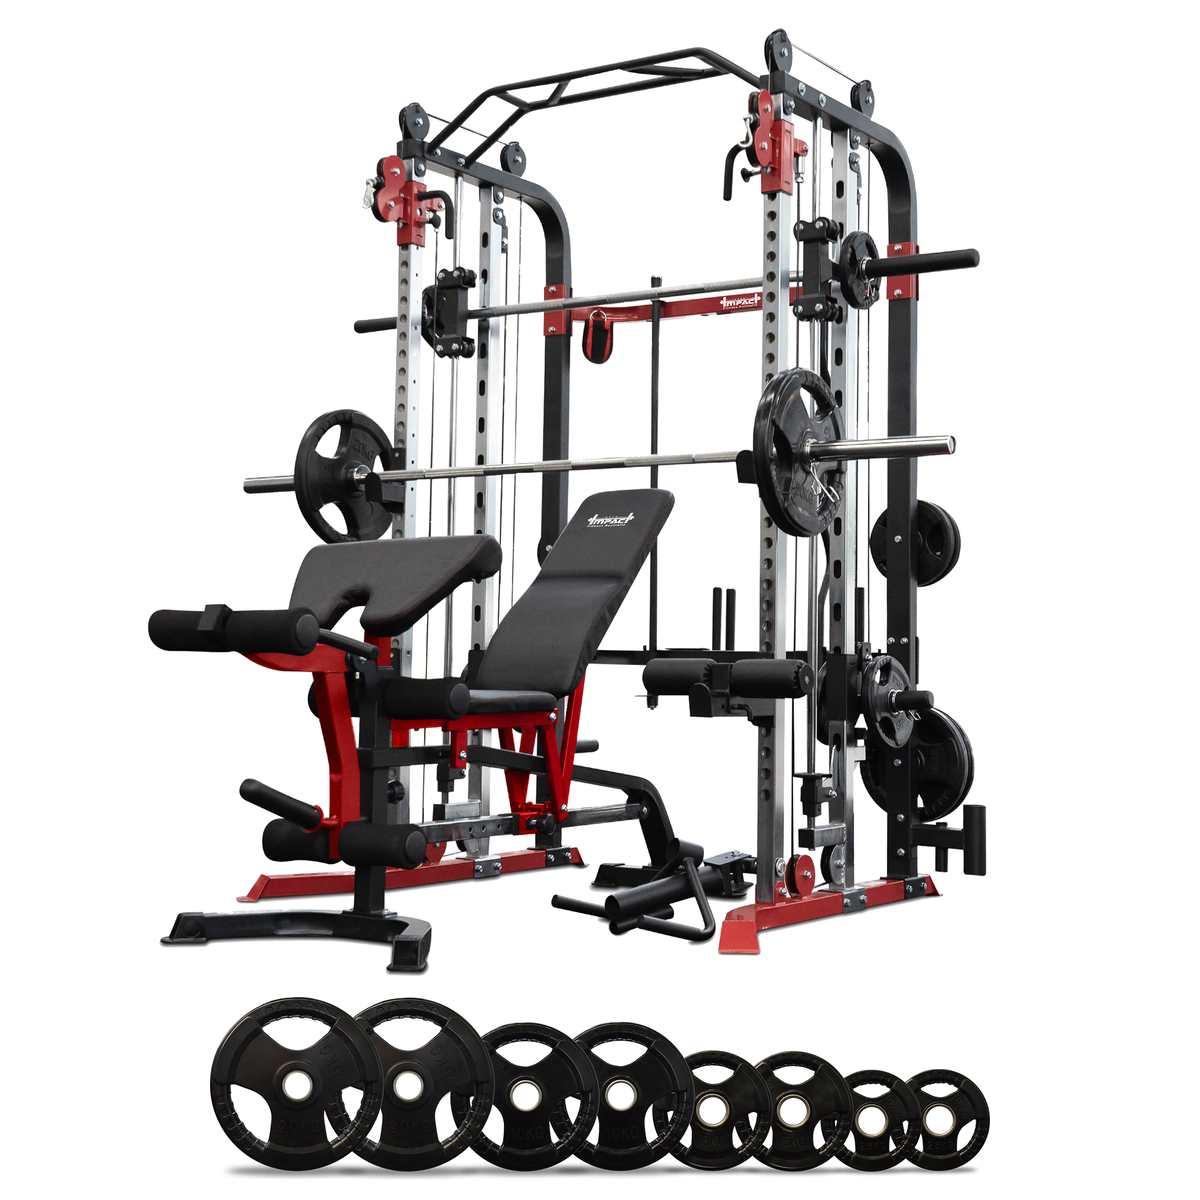 Impact Fitness MF5 Multi Trainer + Adjustable Bench + Olympic Weight Plates + Olympic Barbell